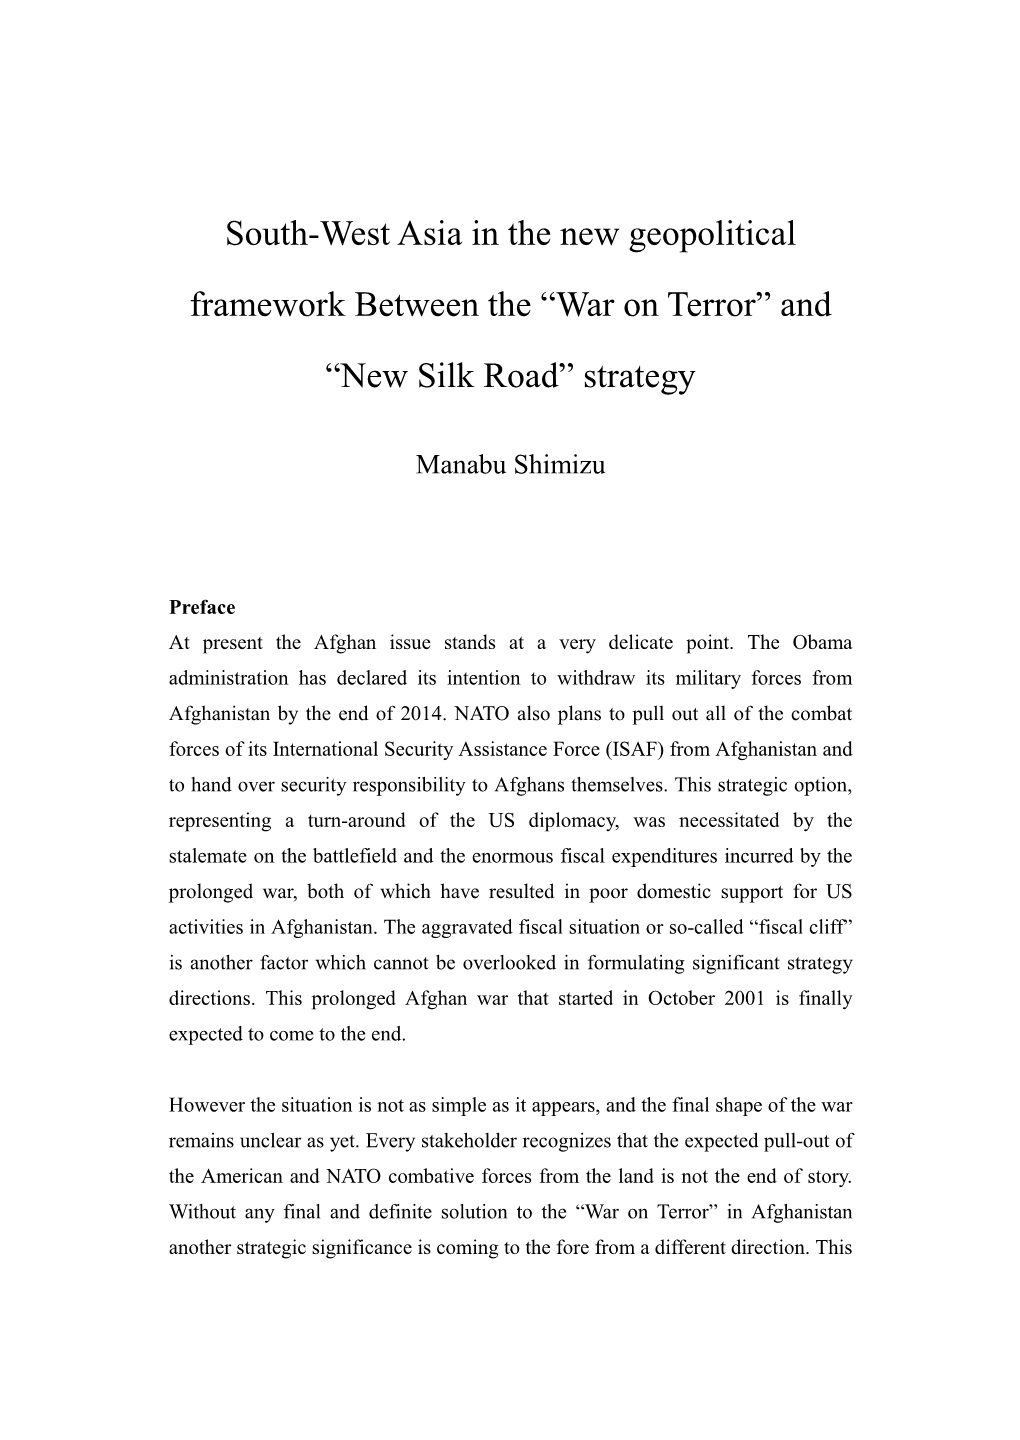 South-West Asia in the New Geopolitical Framework Between the “War on Terror” and “New Silk Road” Strategy